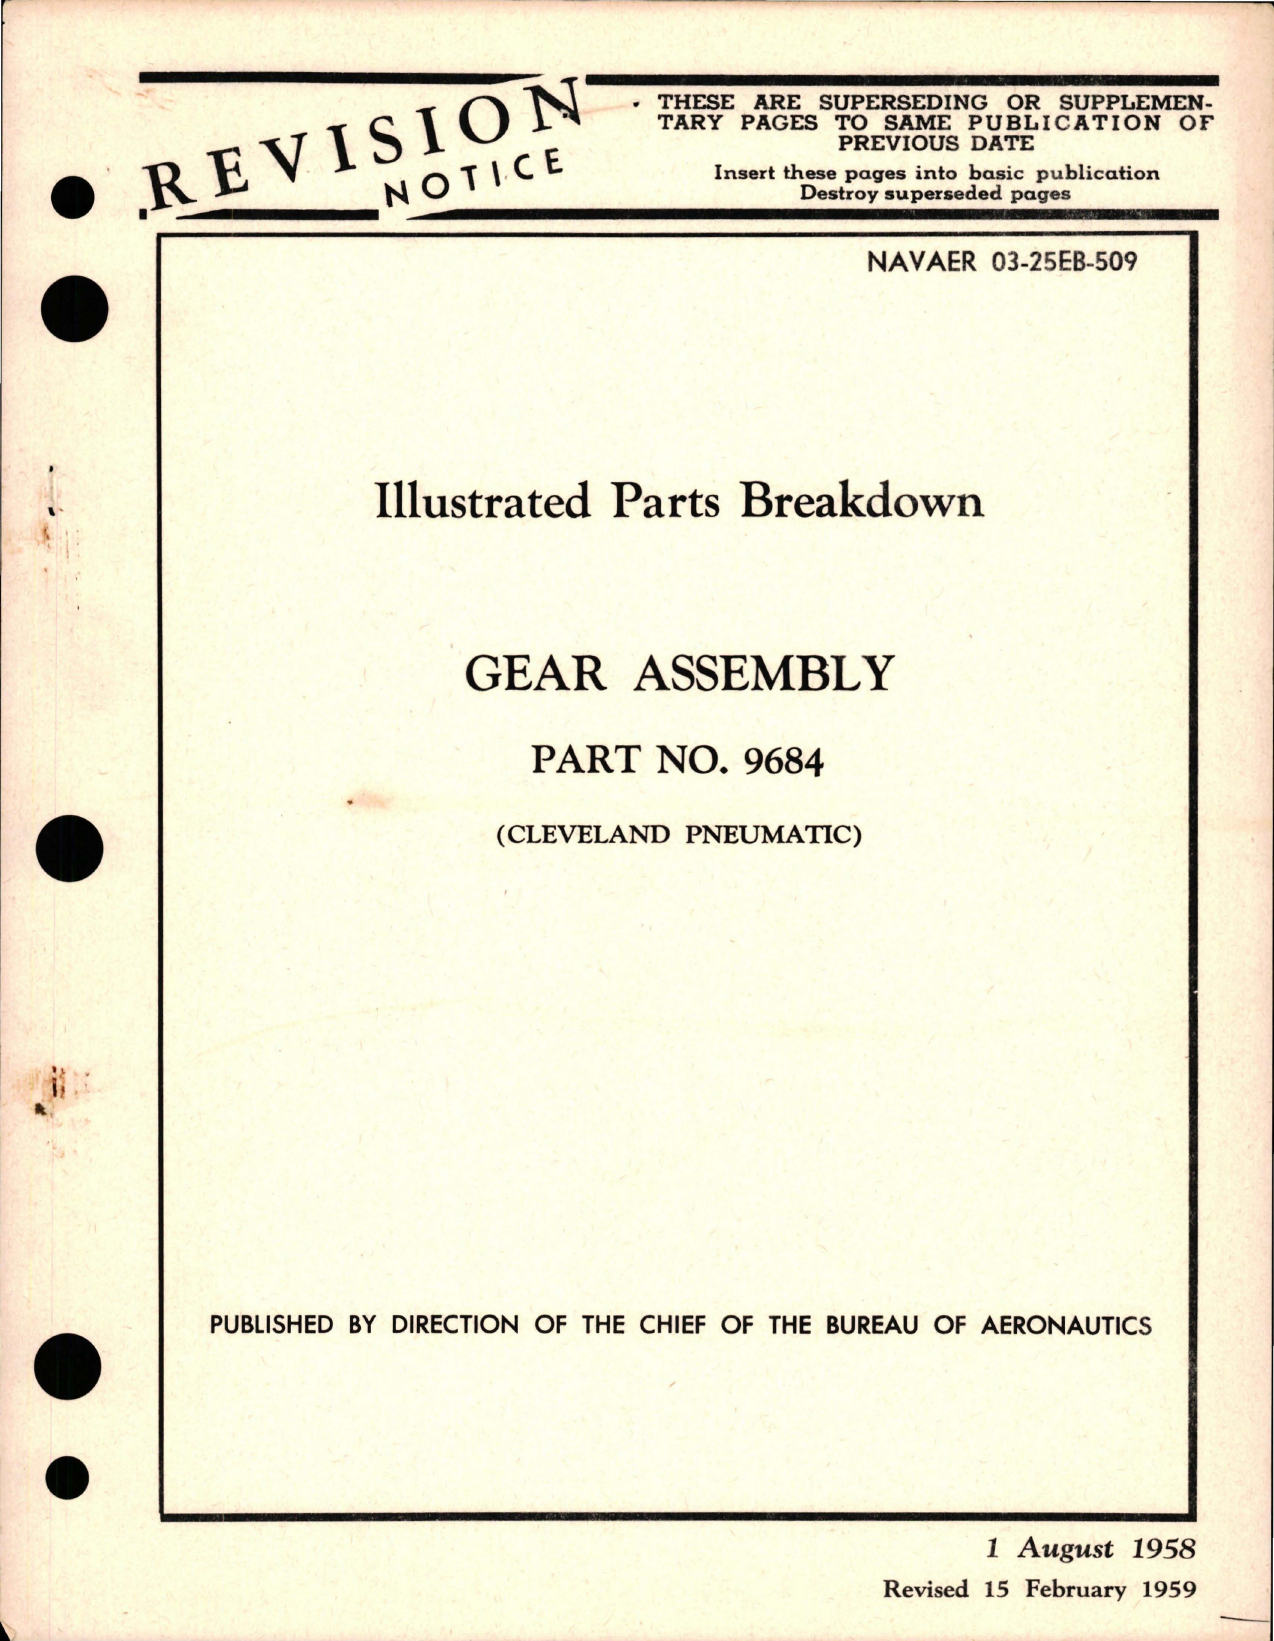 Sample page 1 from AirCorps Library document: Illustrated Parts Breakdown for Gear Assembly - Part 9684